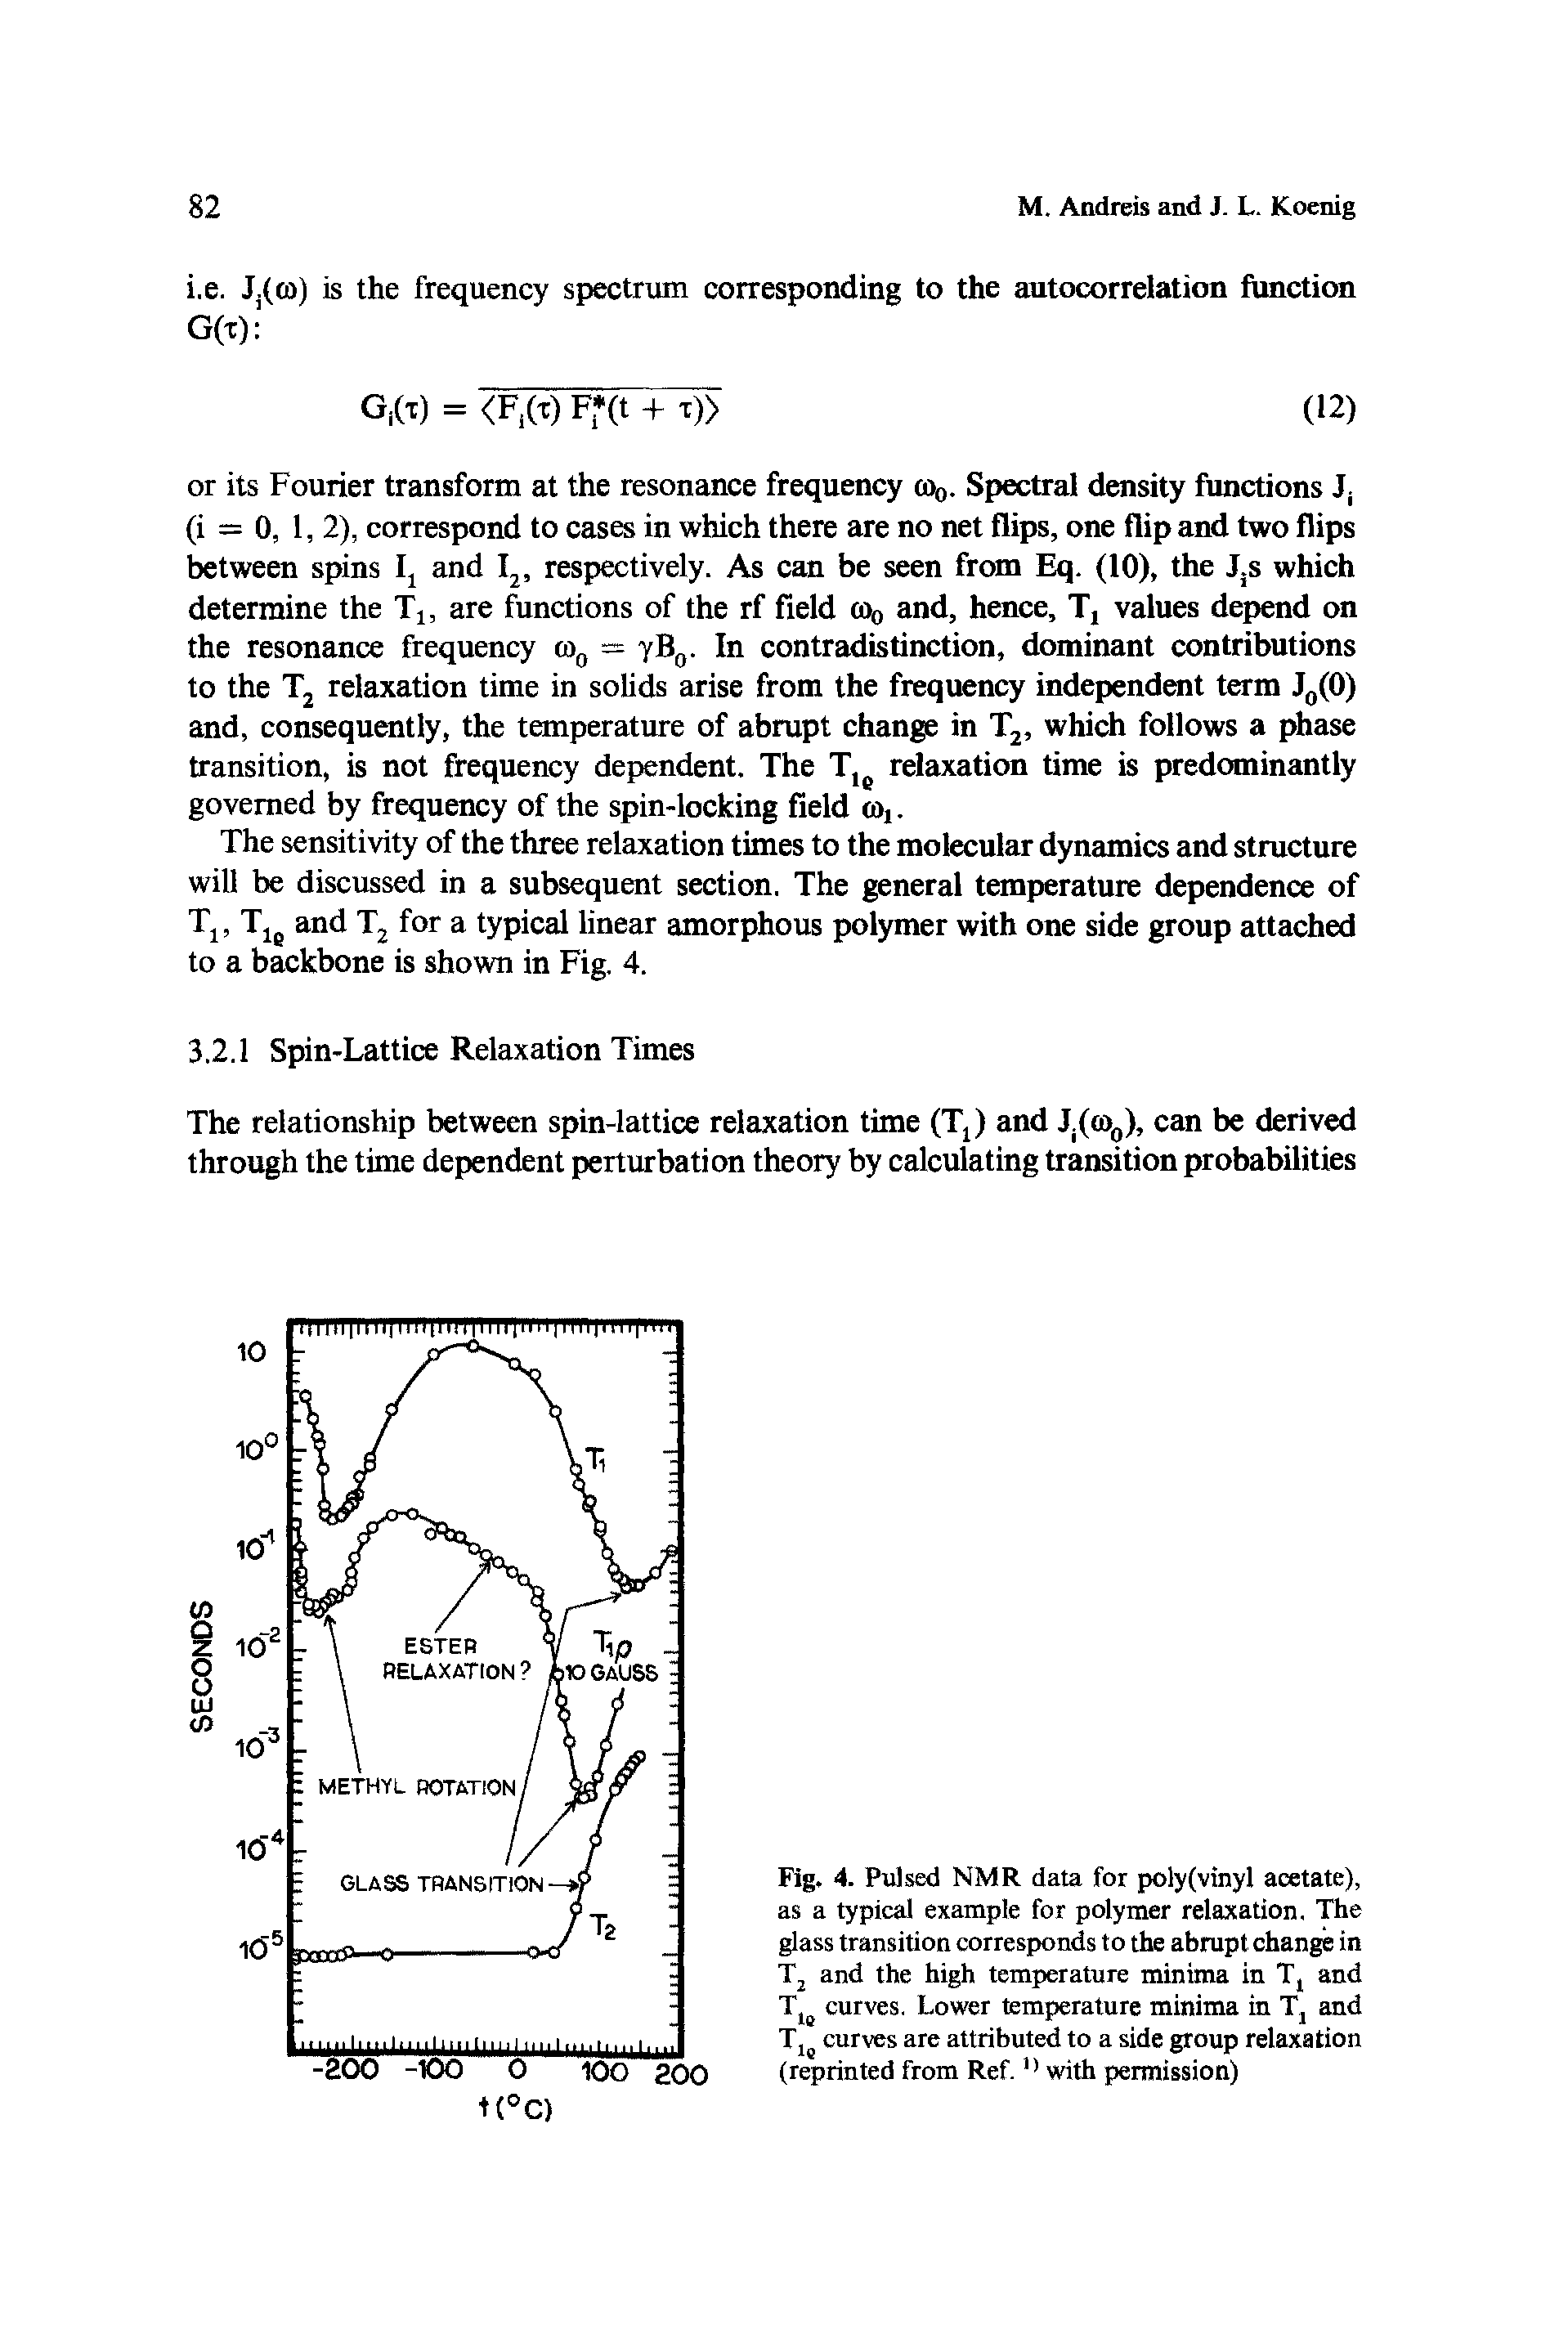 Fig. 4. Pulsed NMR data for poly(vinyl acetate), as a typical example for polymer relaxation. The glass transition corresponds to the abrupt change in T2 and the high temperature minima in T, and T( curves. Lower temperature minima in T, and Tj curves are attributed to a side group relaxation (reprinted from Ref.11 with permission)...